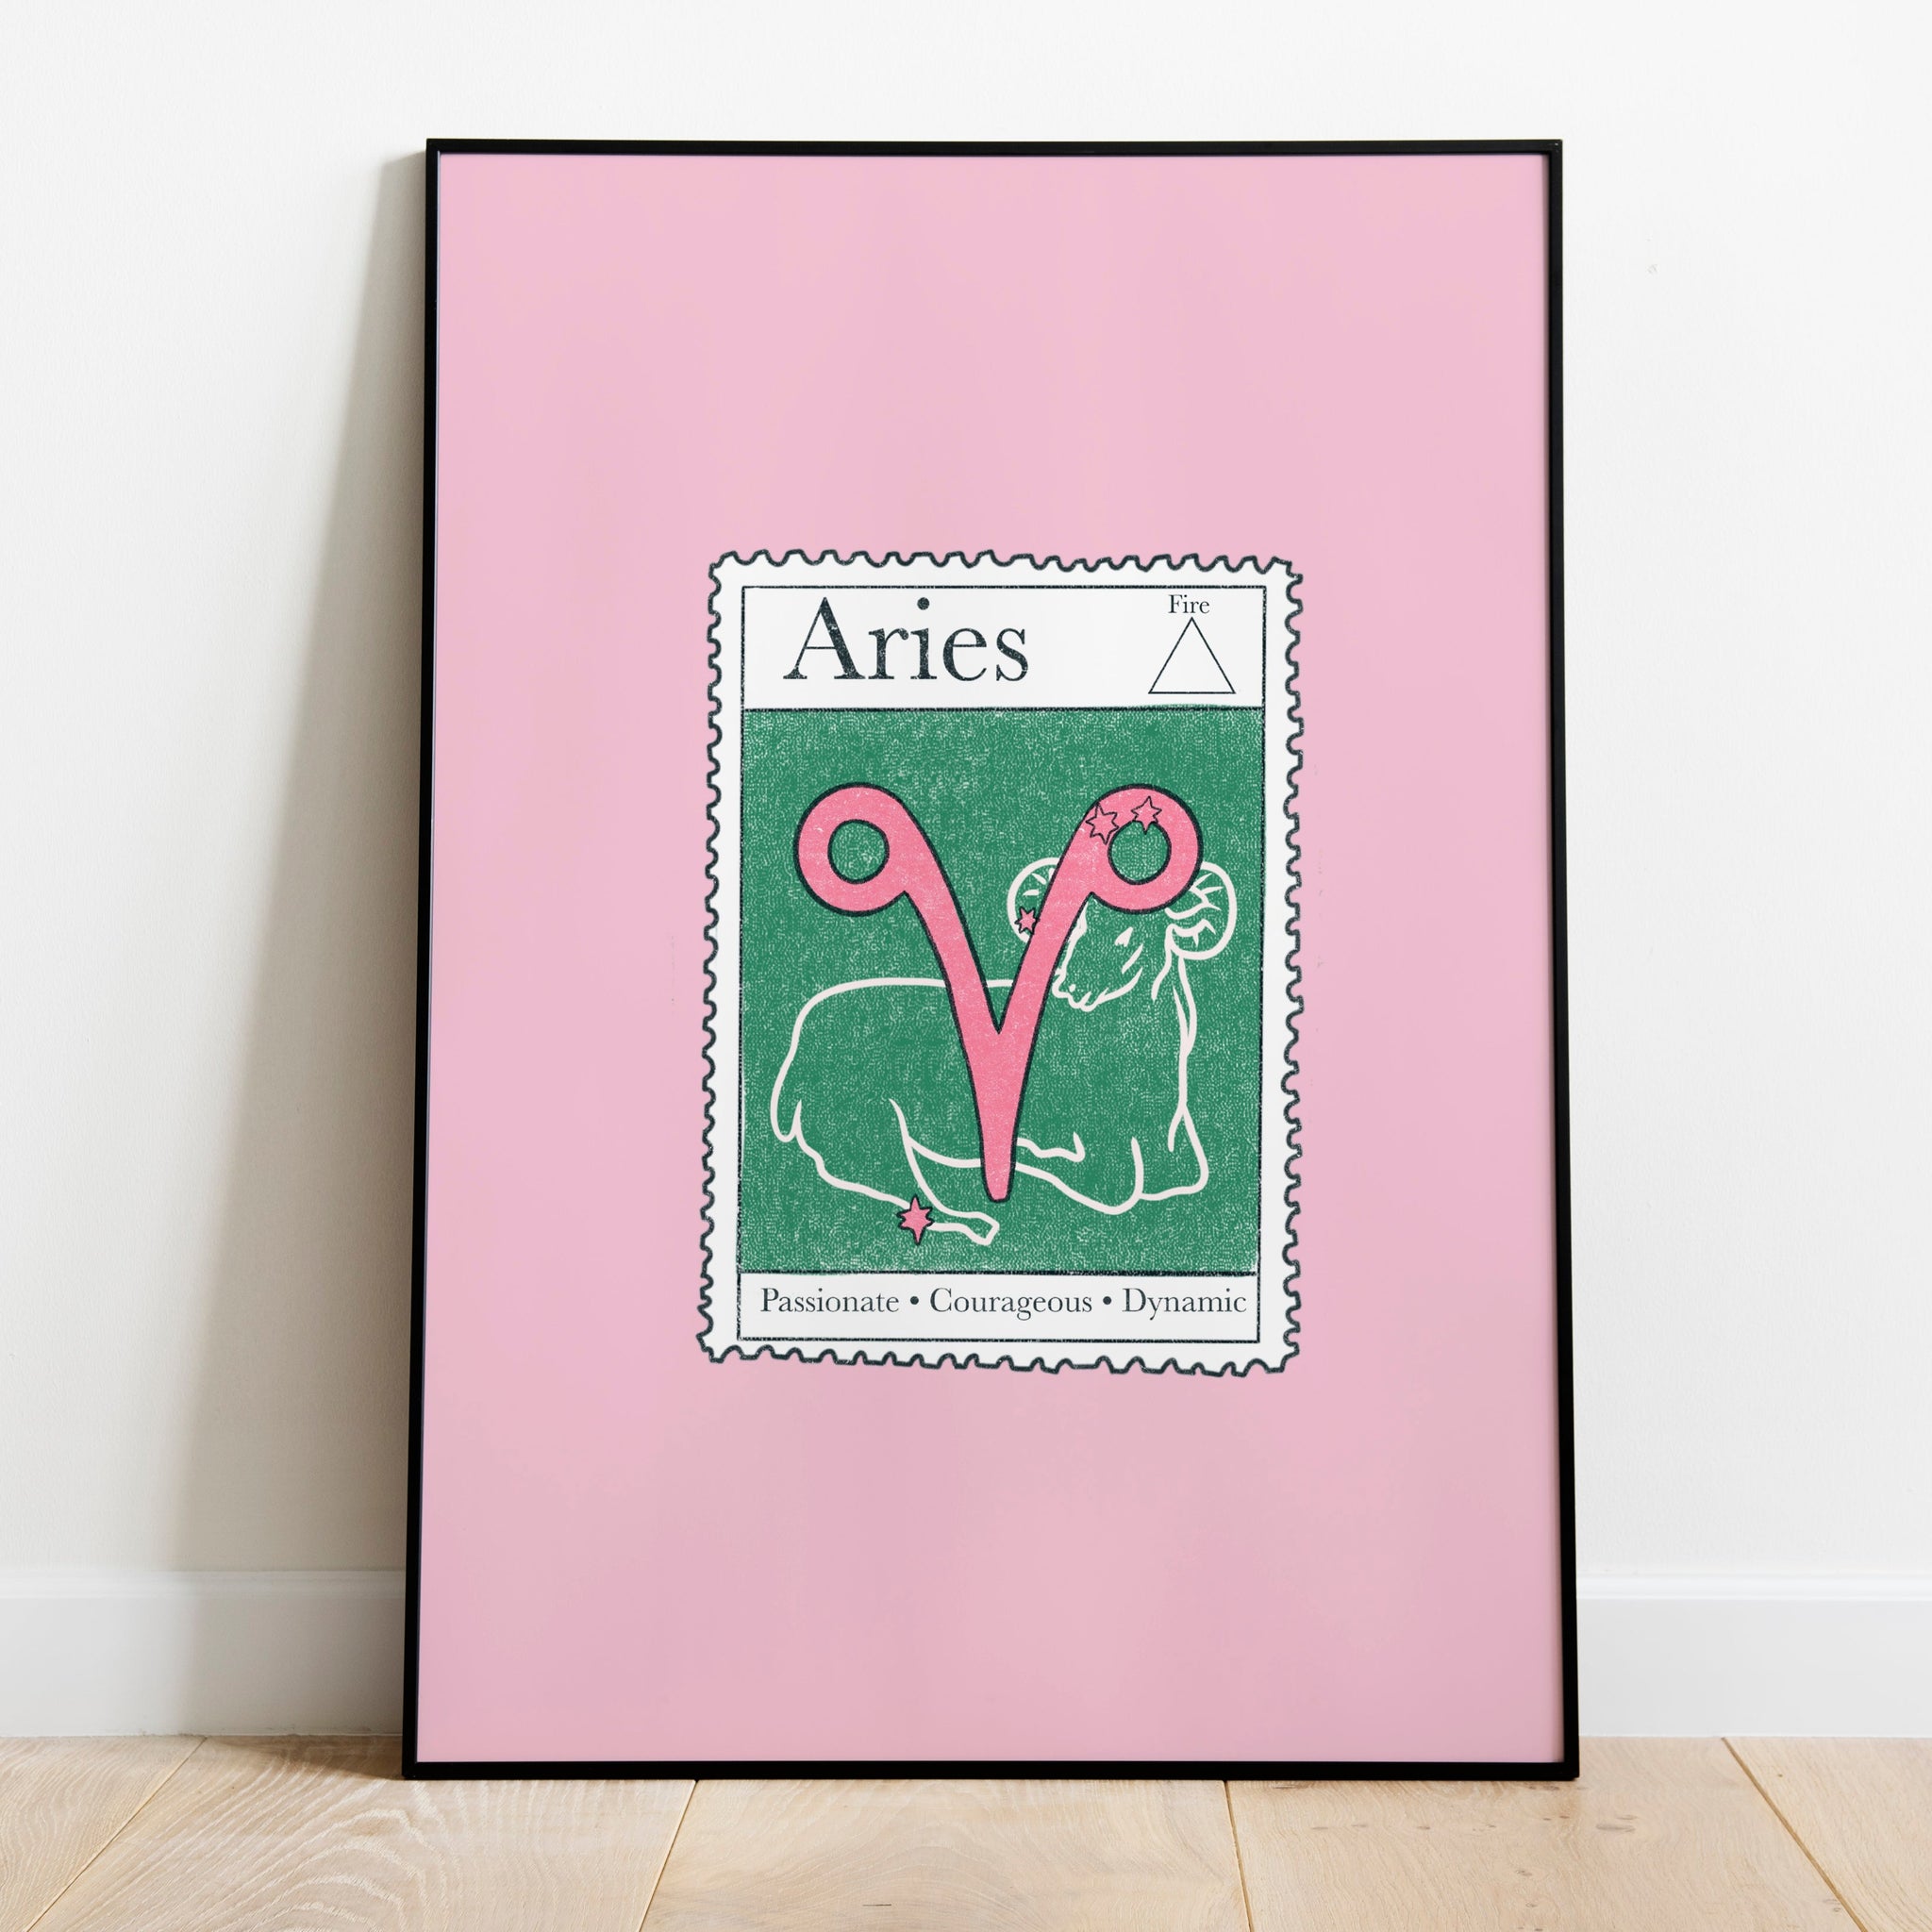 Image of a framed art print leaning against the wall. The art print itself is a postage stamp representing the star sign of Aries. The print is bright and colourful in shades of green, pinks and cream.